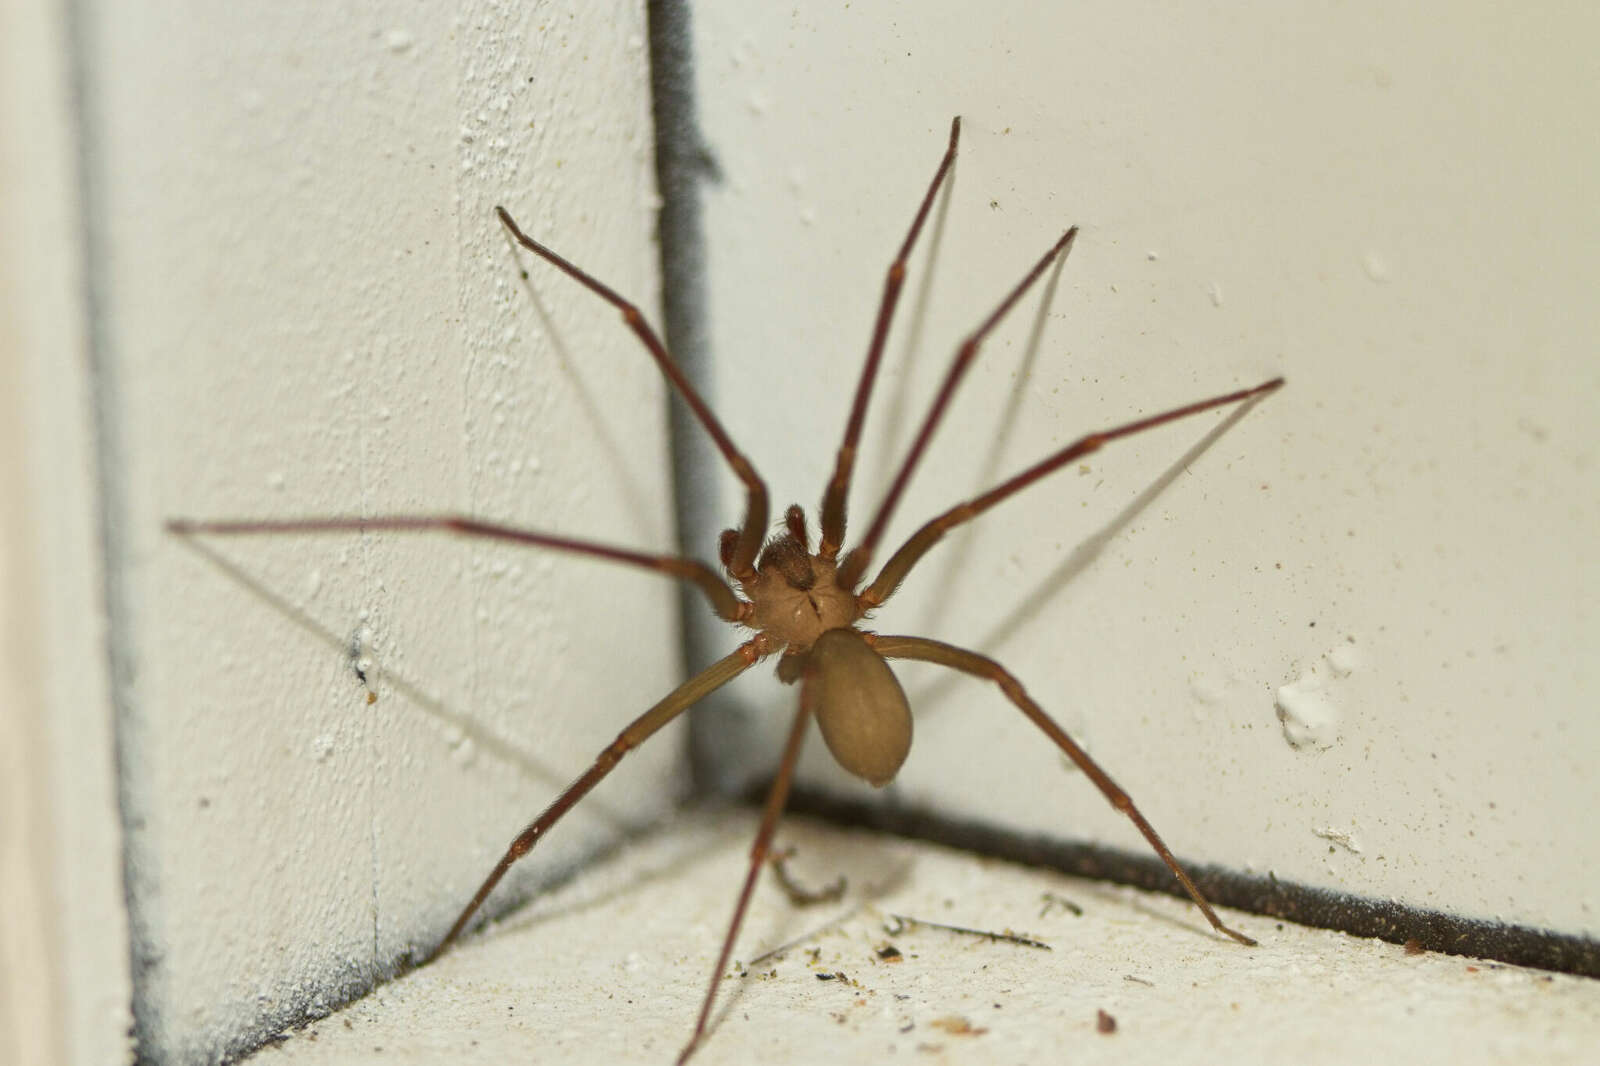 An image of a brown recluse spider.